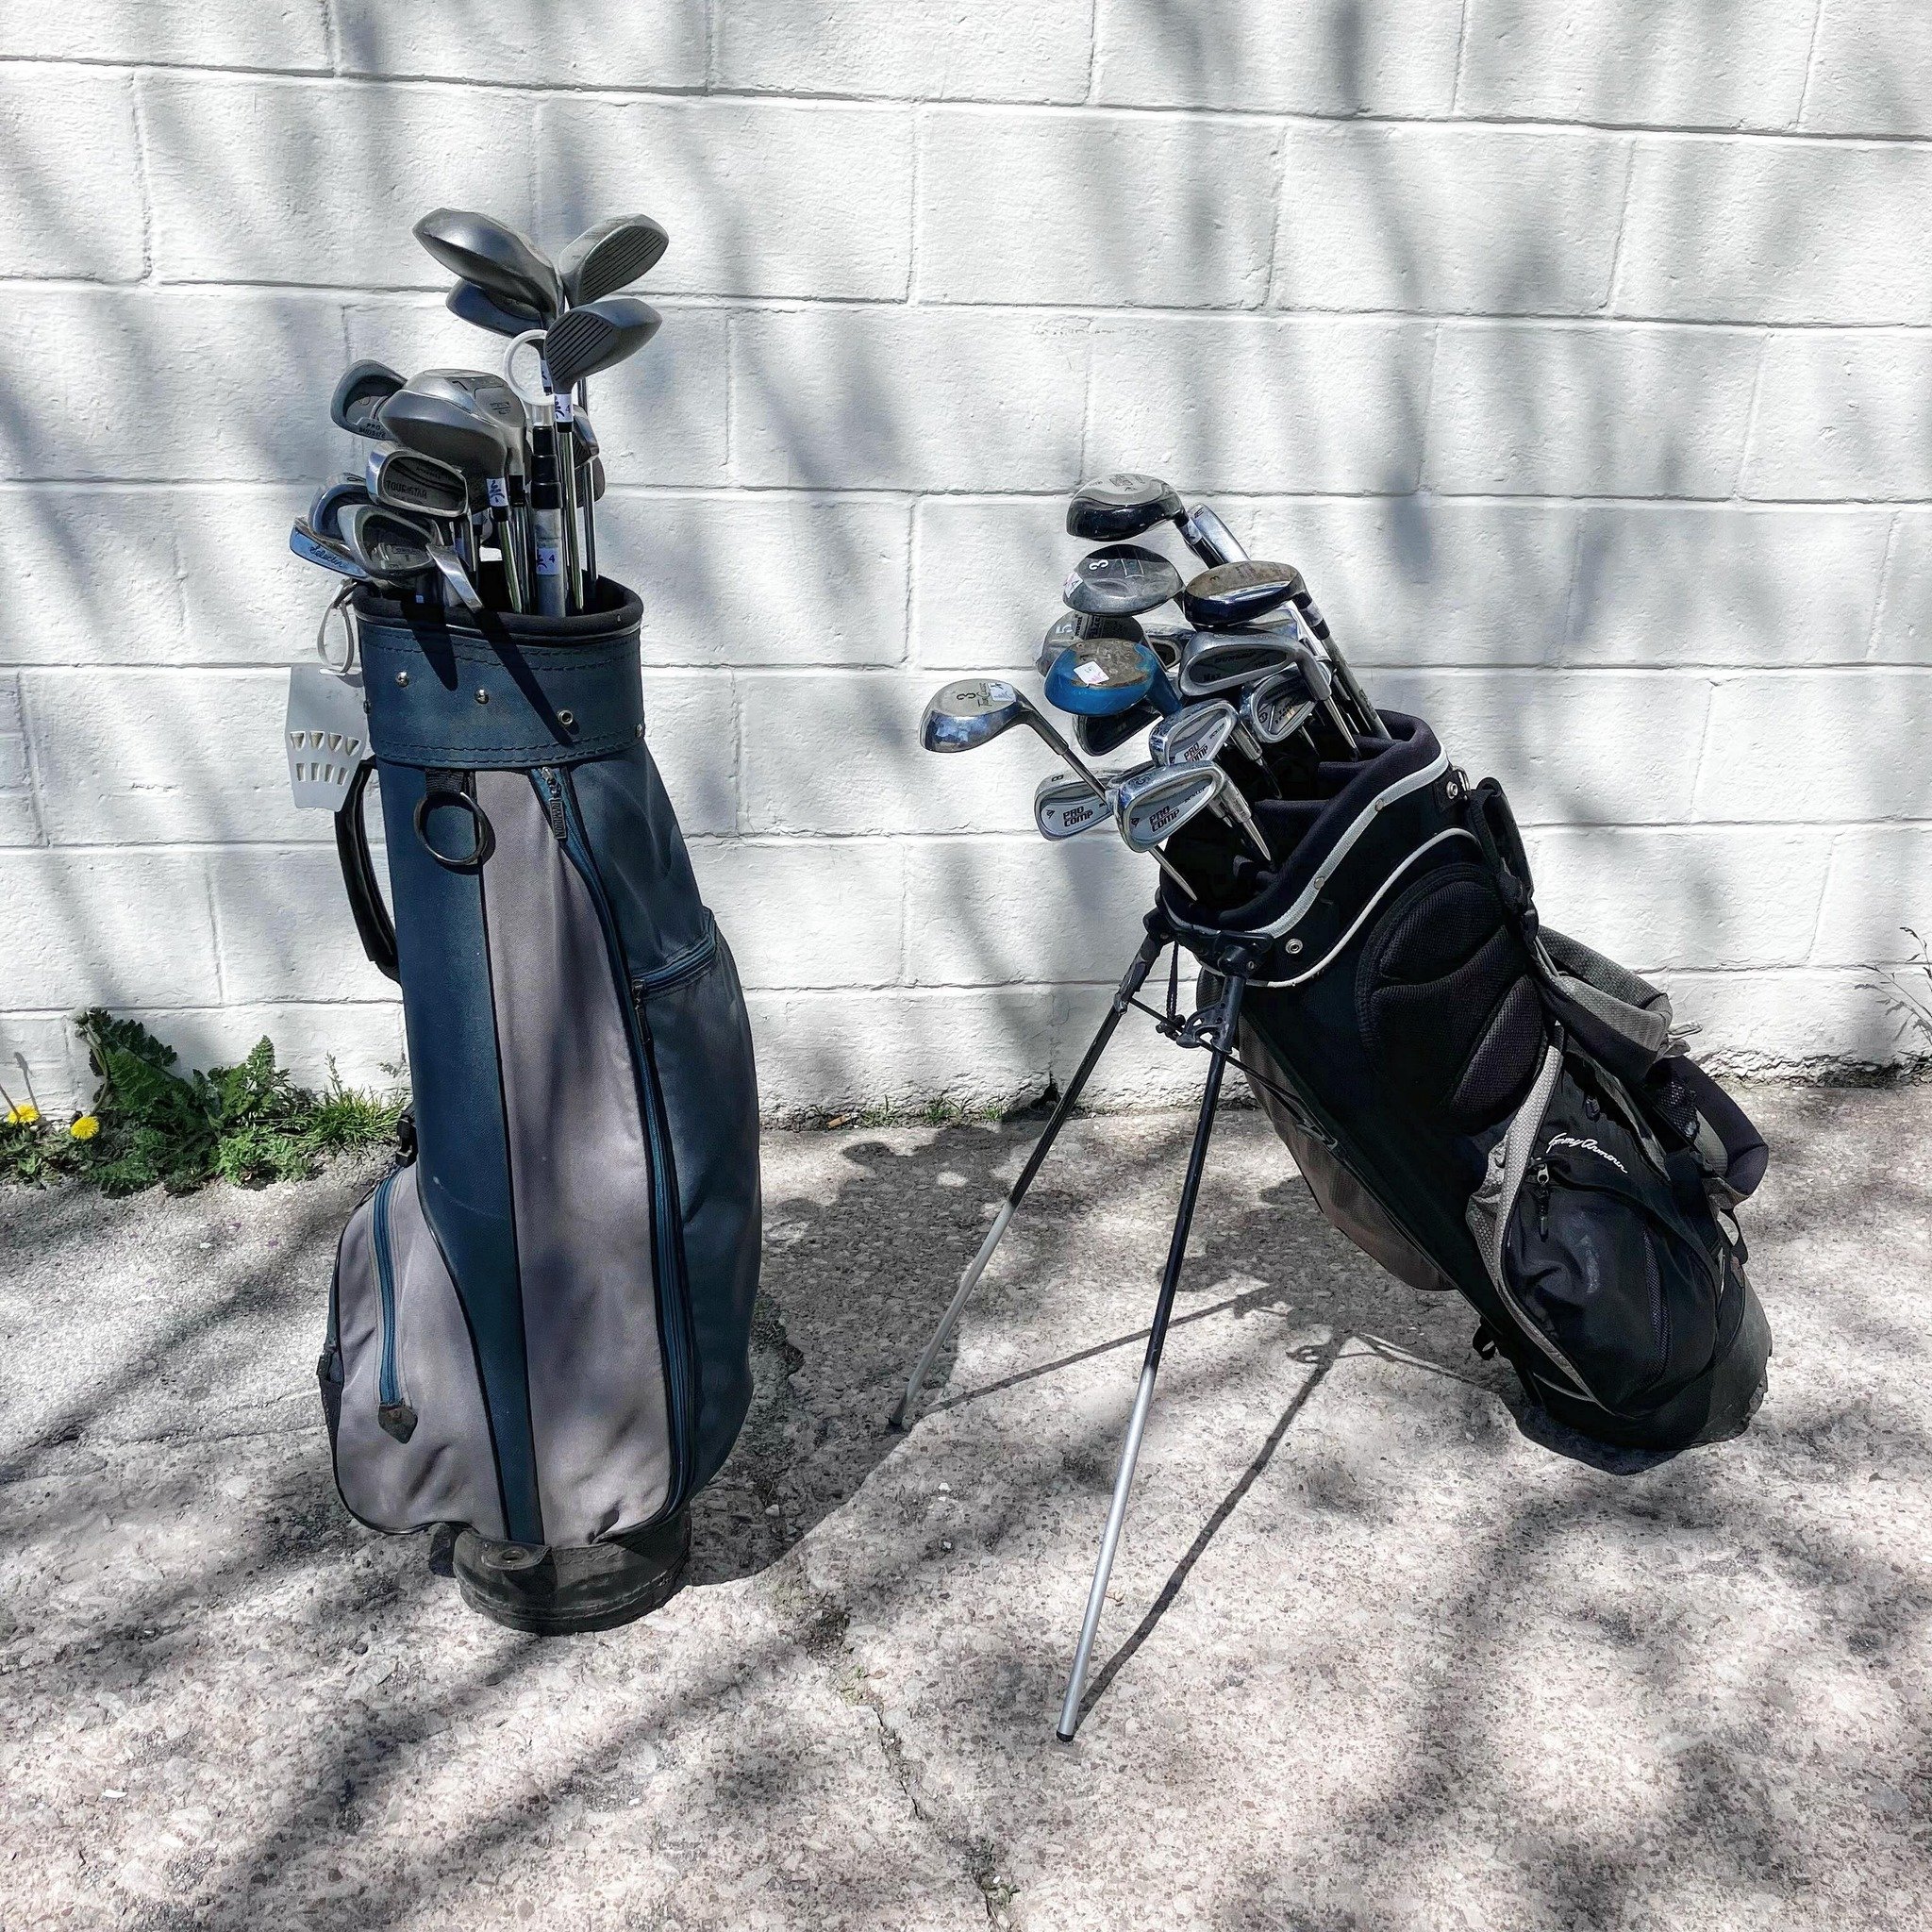 So many golf clubs in stock right now.

All priced from $3 - $6 each

🌲

#thriftstore #niagarafalls #secondhand #shoplocal